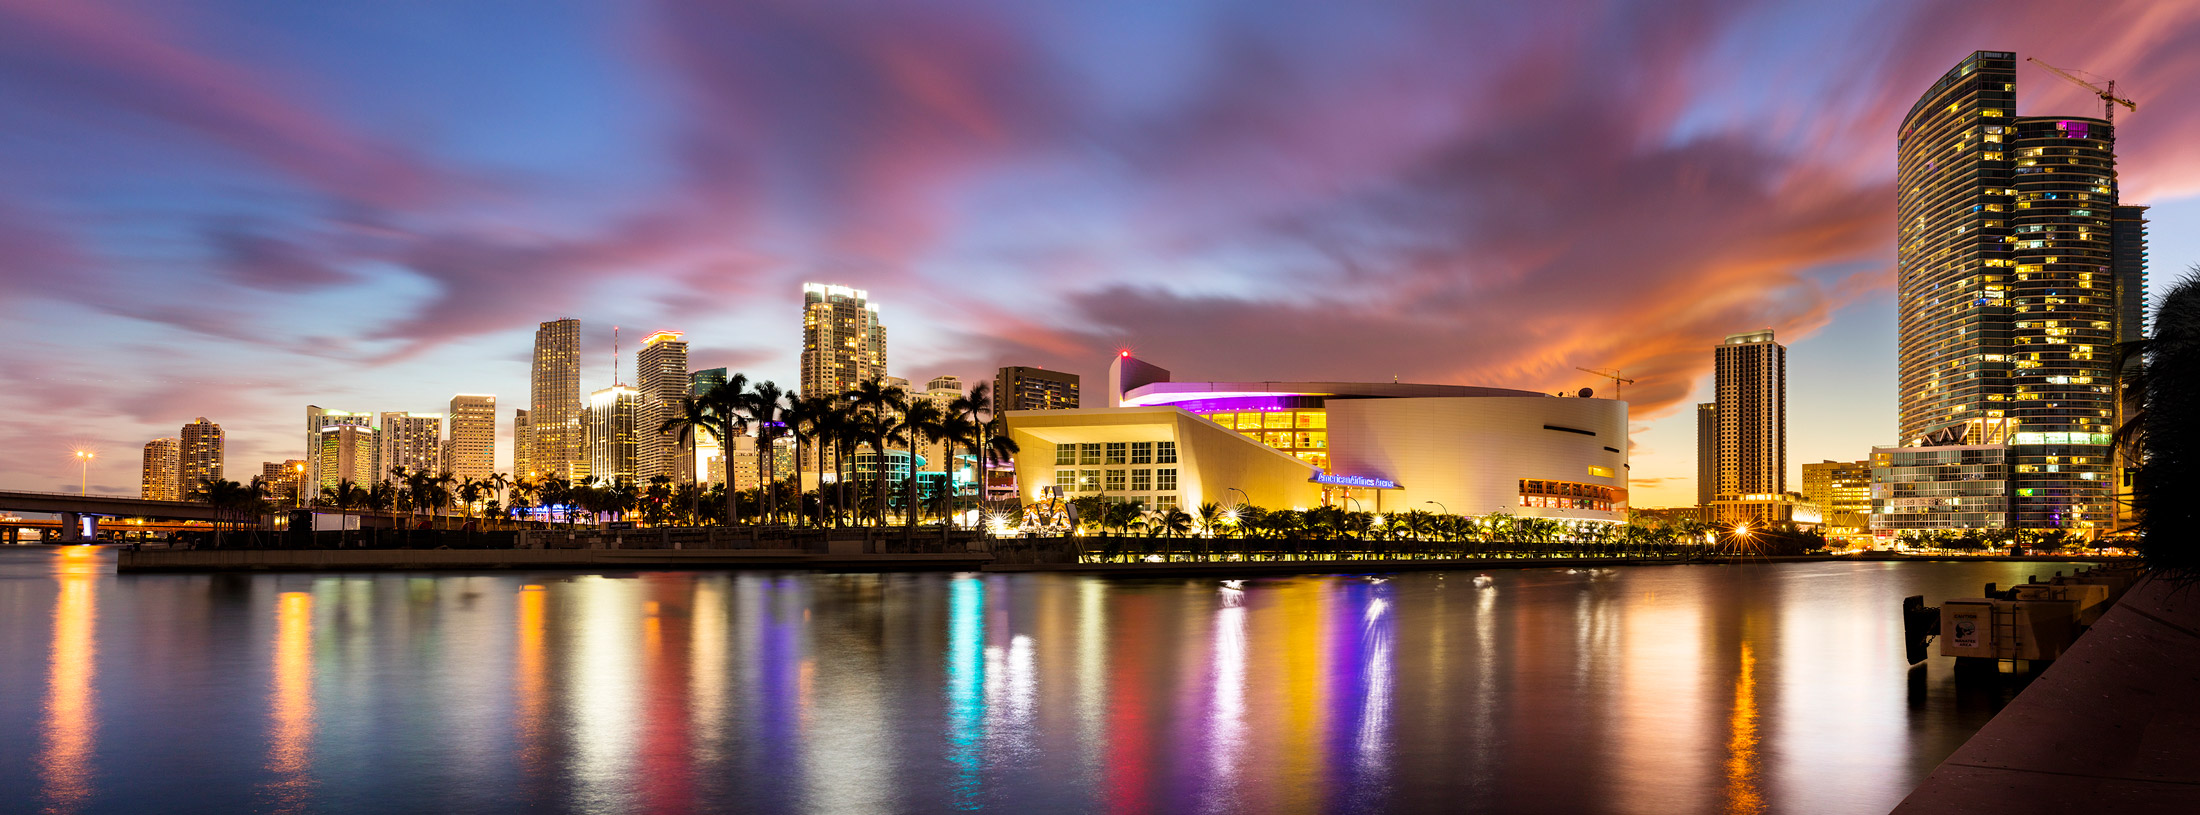 Downtown Convention Center Miami Sunset